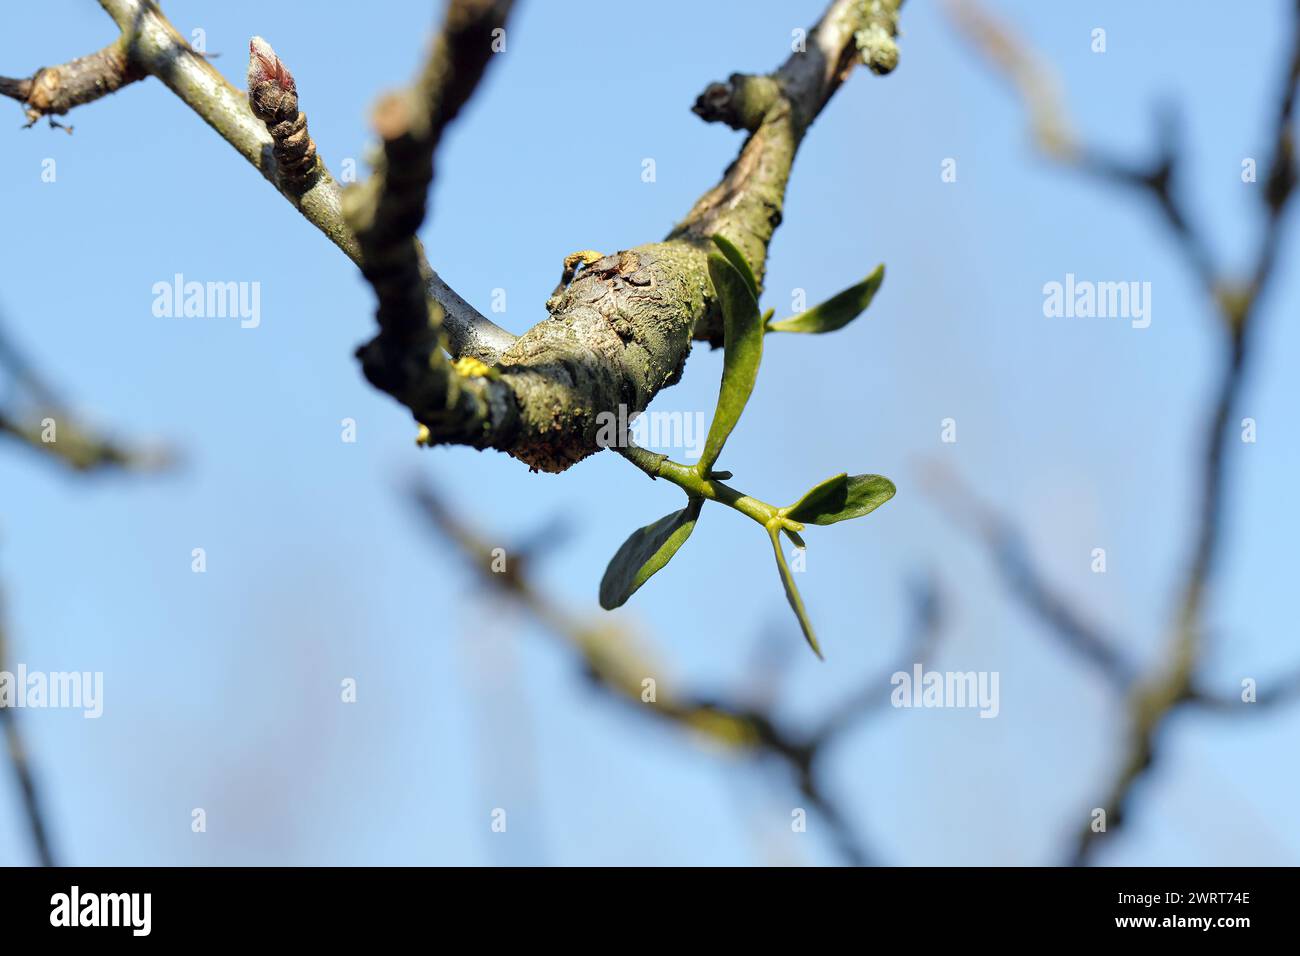 Mistletoe growing on an apple tree branch. A young plant, a semi-parasite of plants that weakens trees. Stock Photo